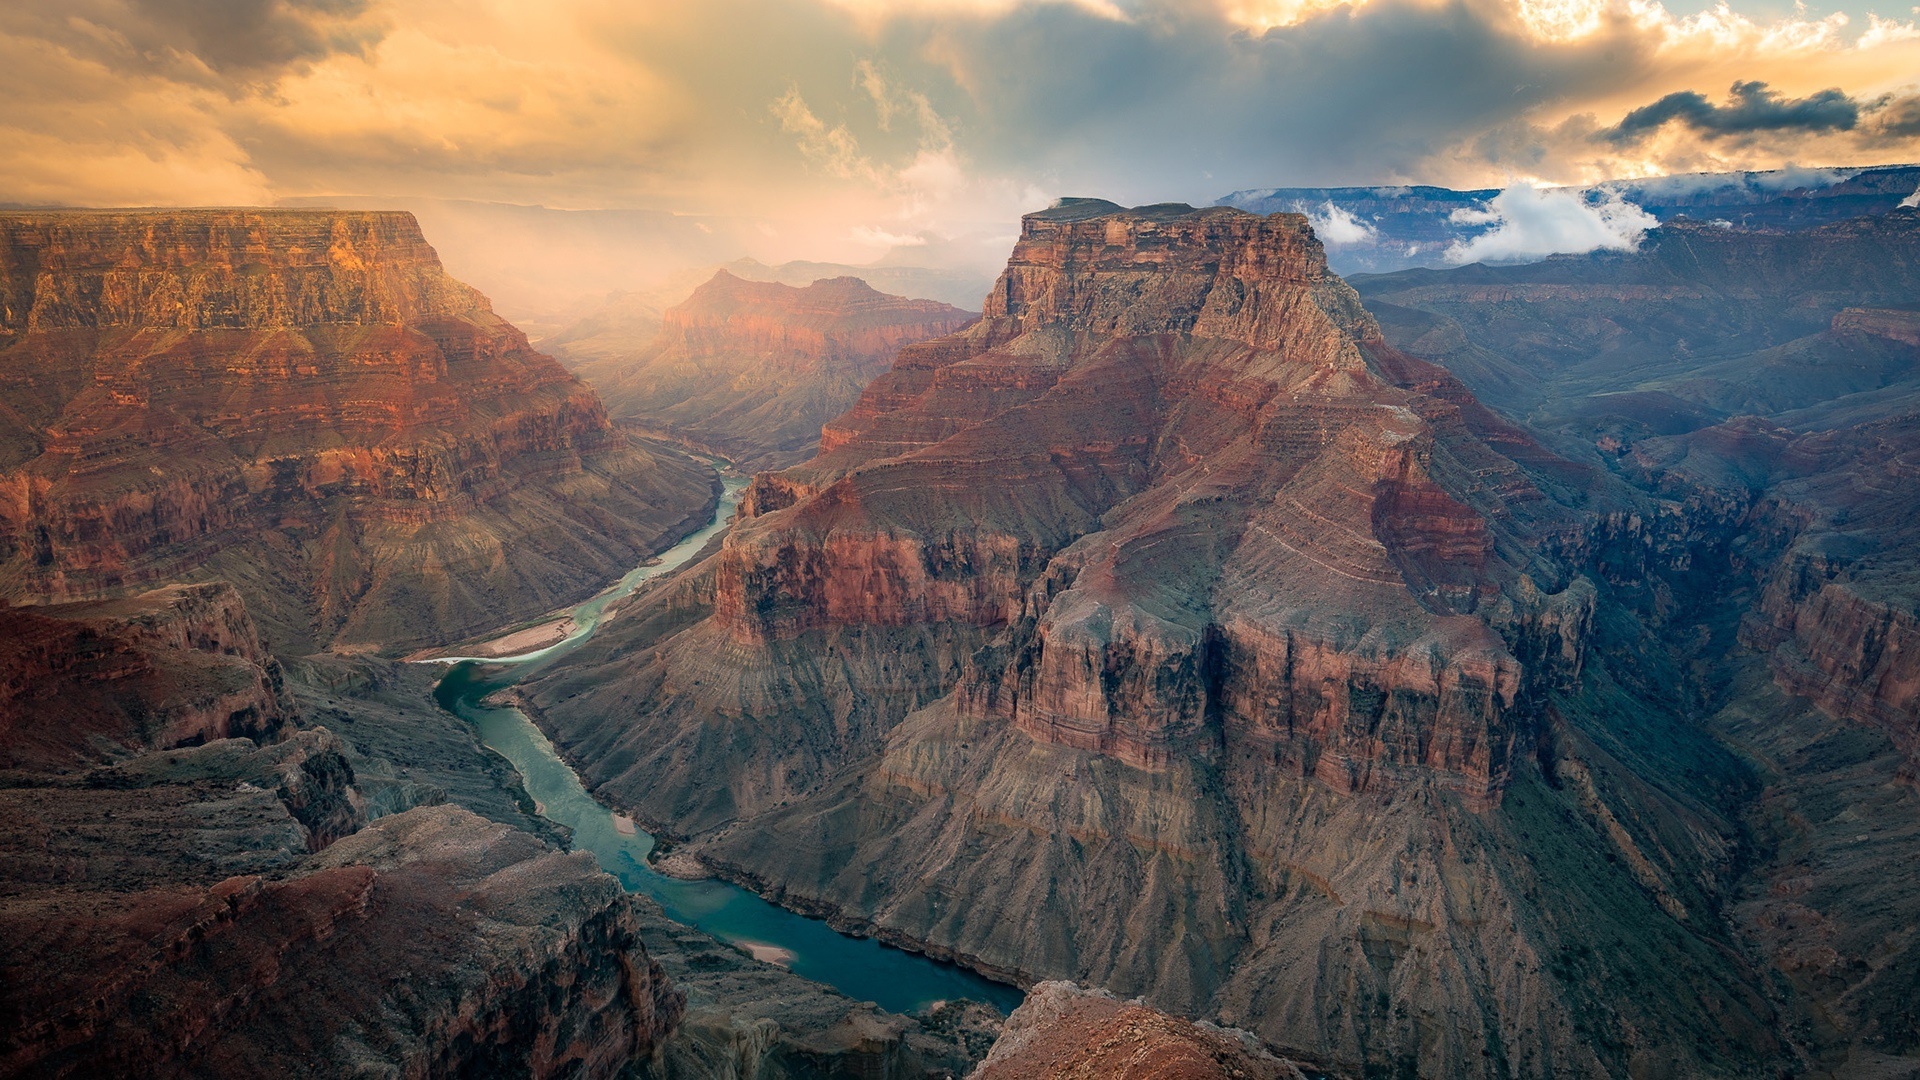 The Colorado River, HD wallpapers, Stunning backgrounds, Natural beauty, 1920x1080 Full HD Desktop